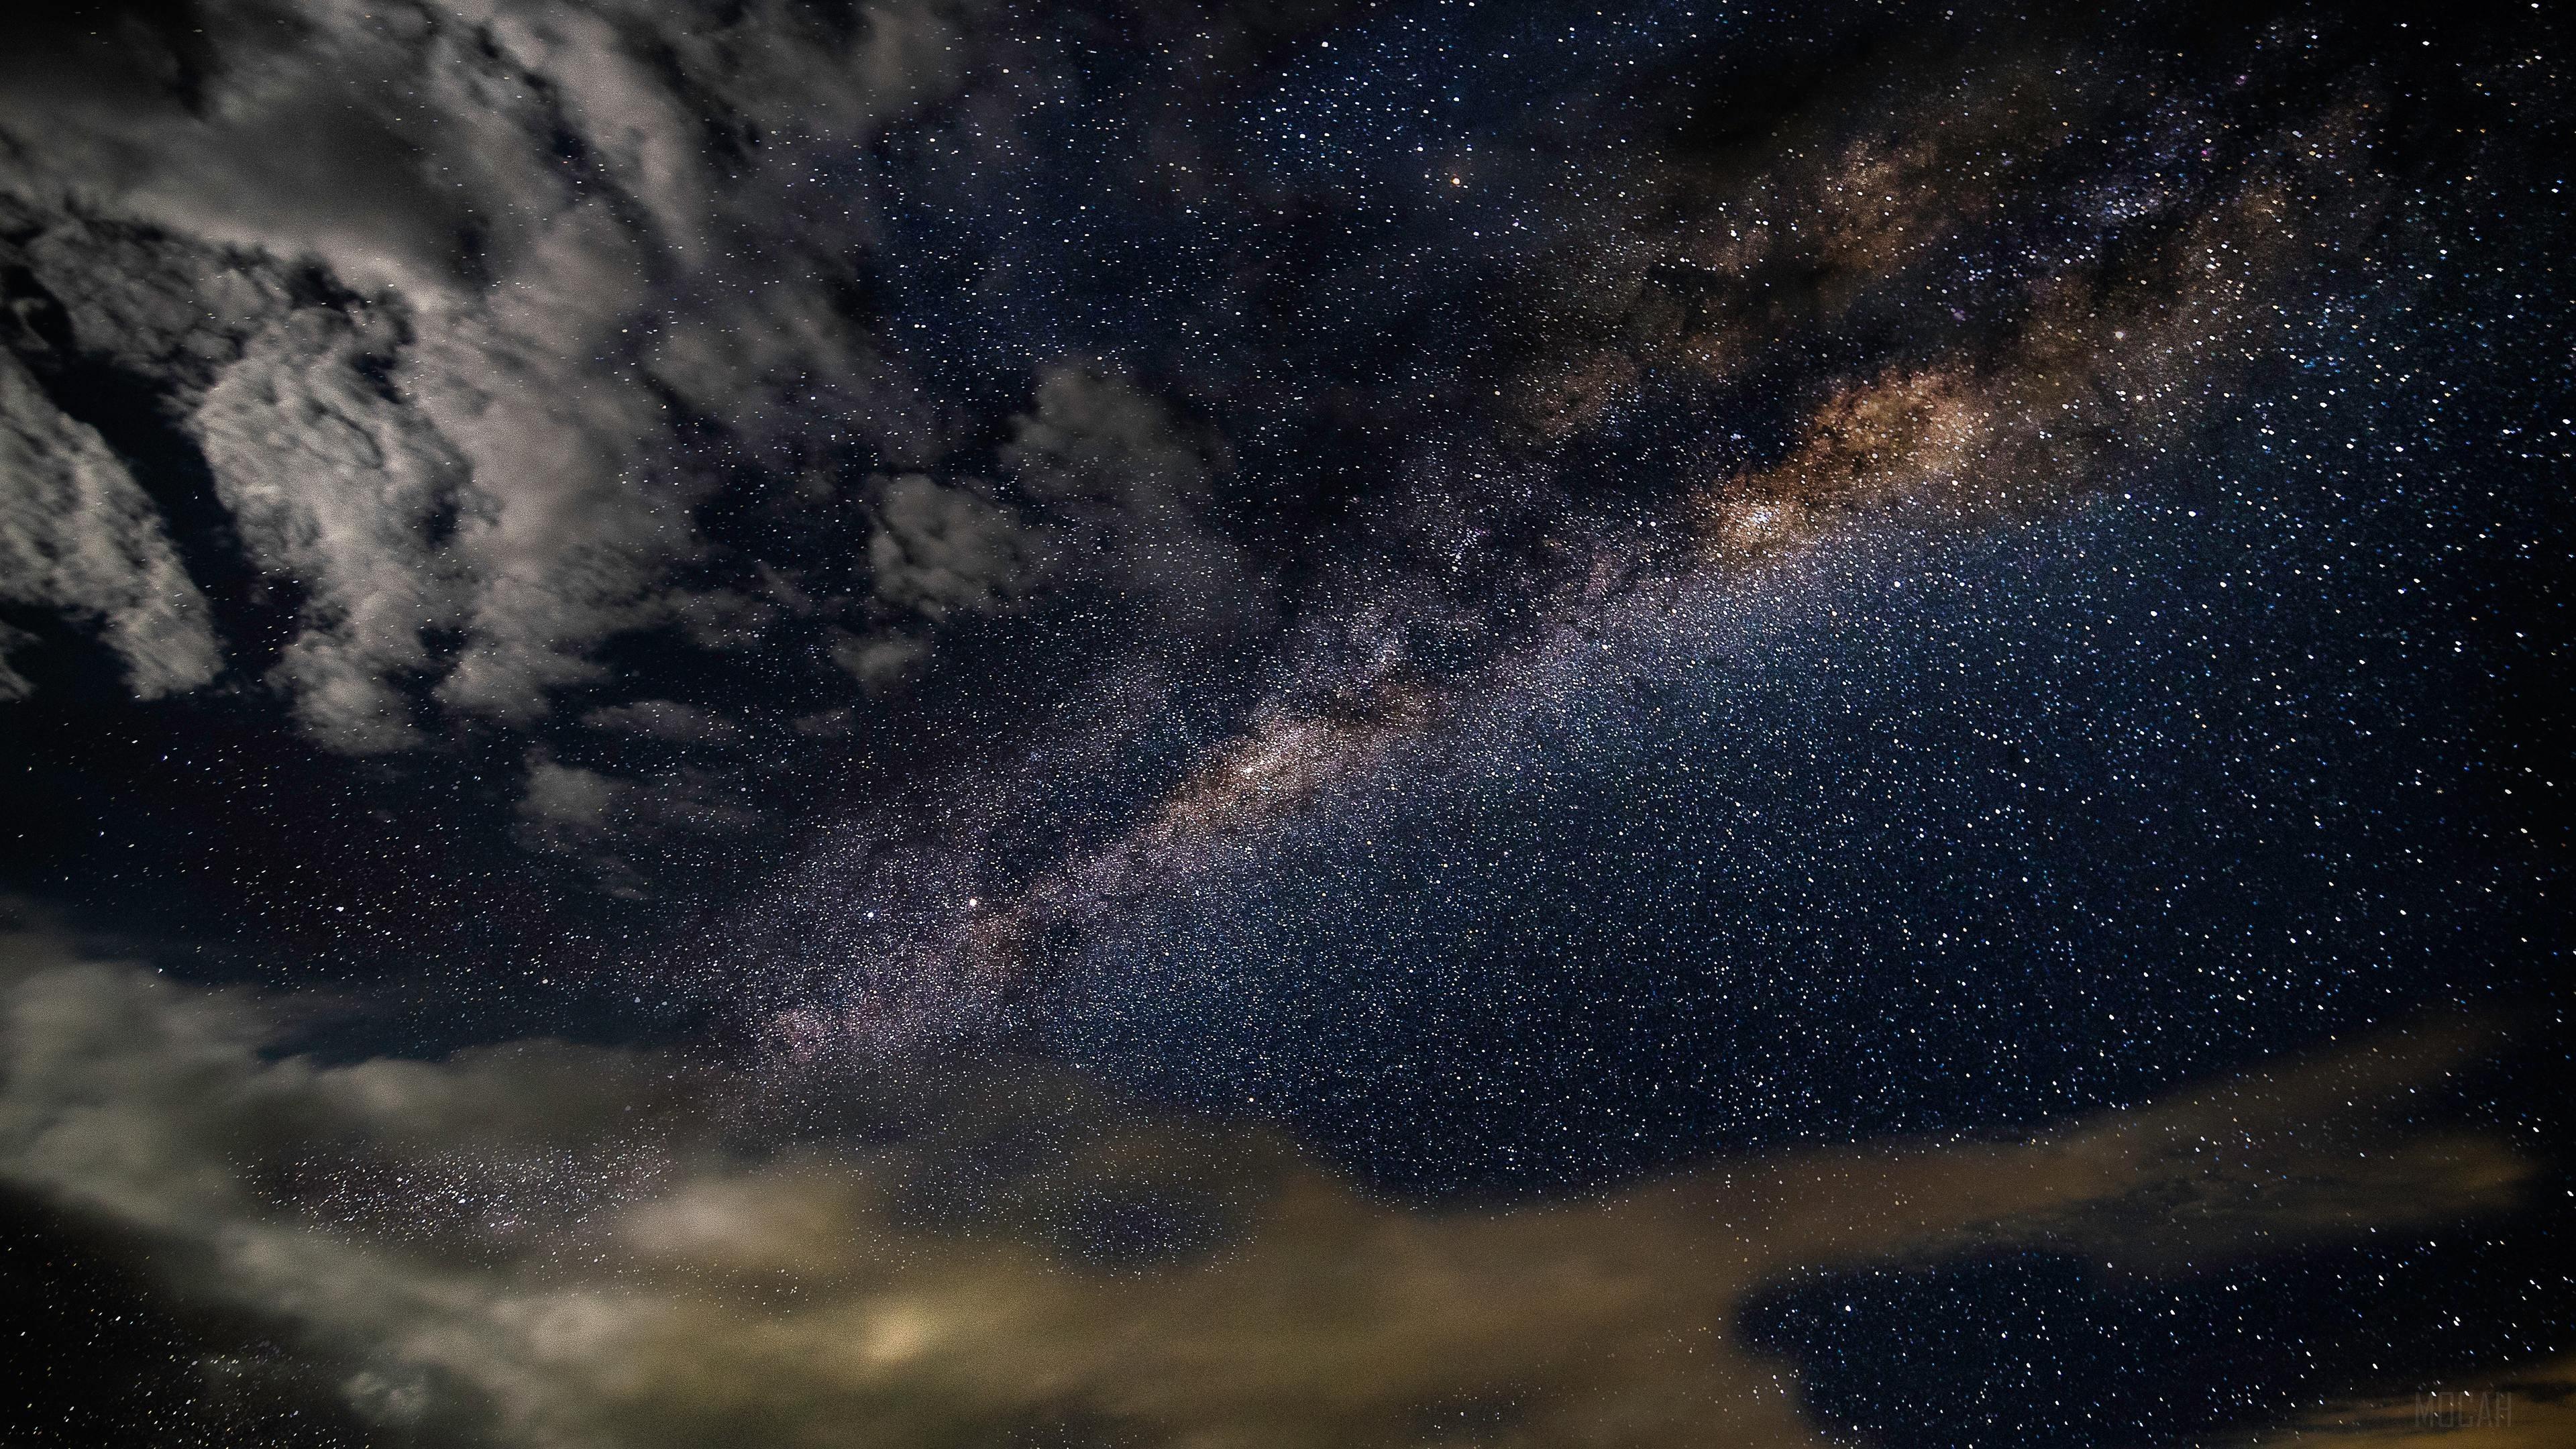 HD wallpaper, Milky Way Astronomy Constellations Storm Clouds Stars 4K